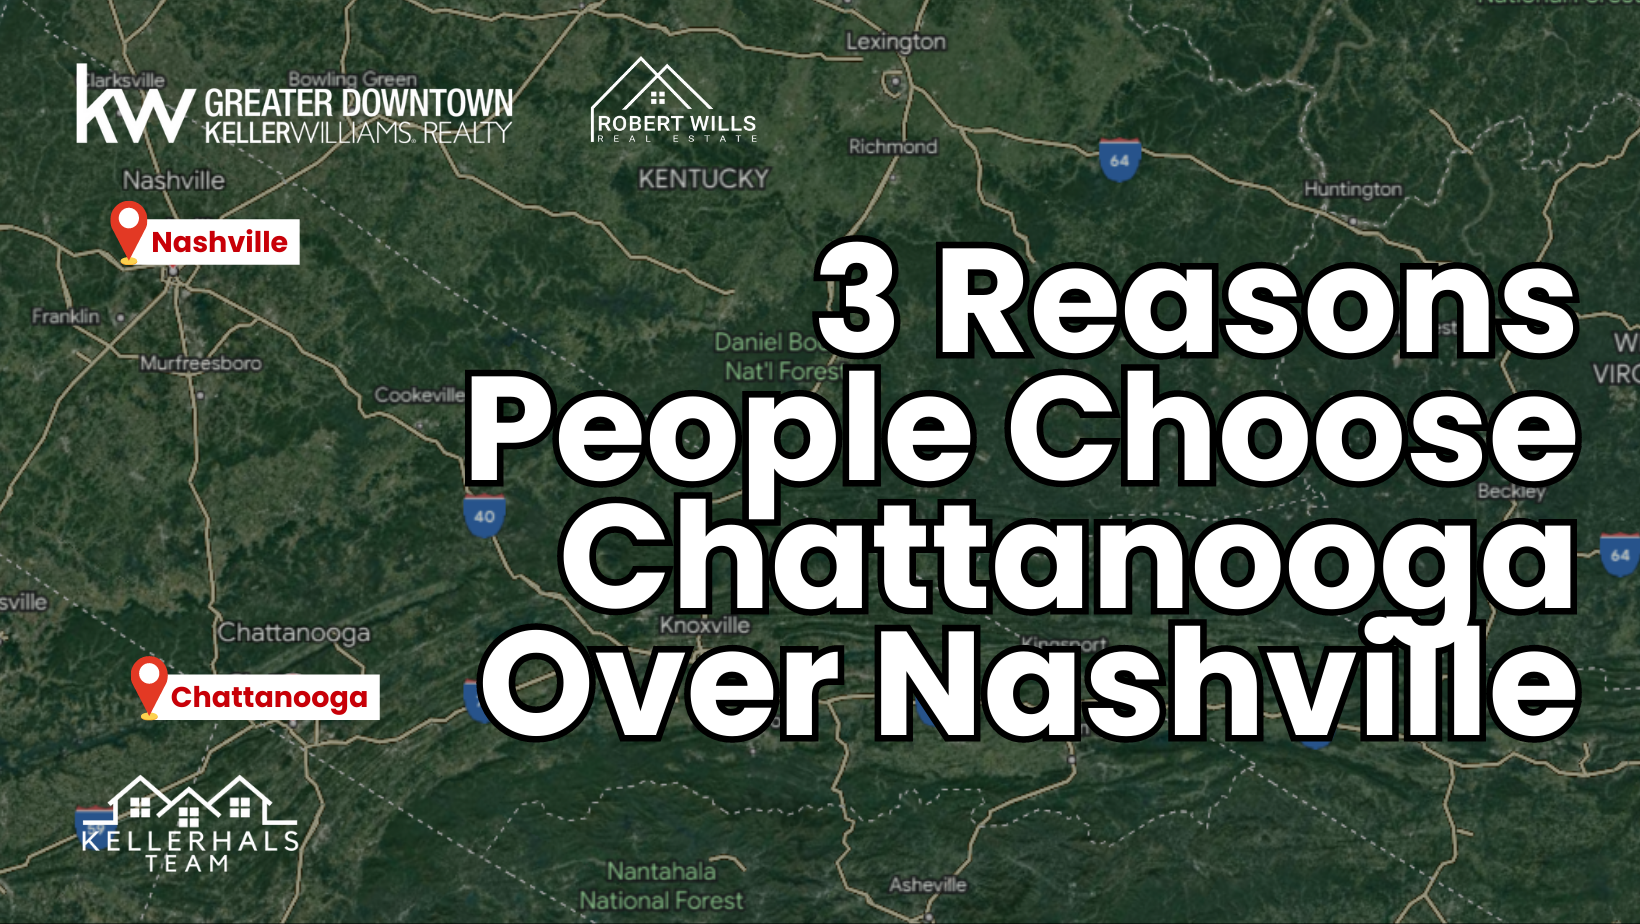 3 Reasons People Choose Chattanooga Over Nashville